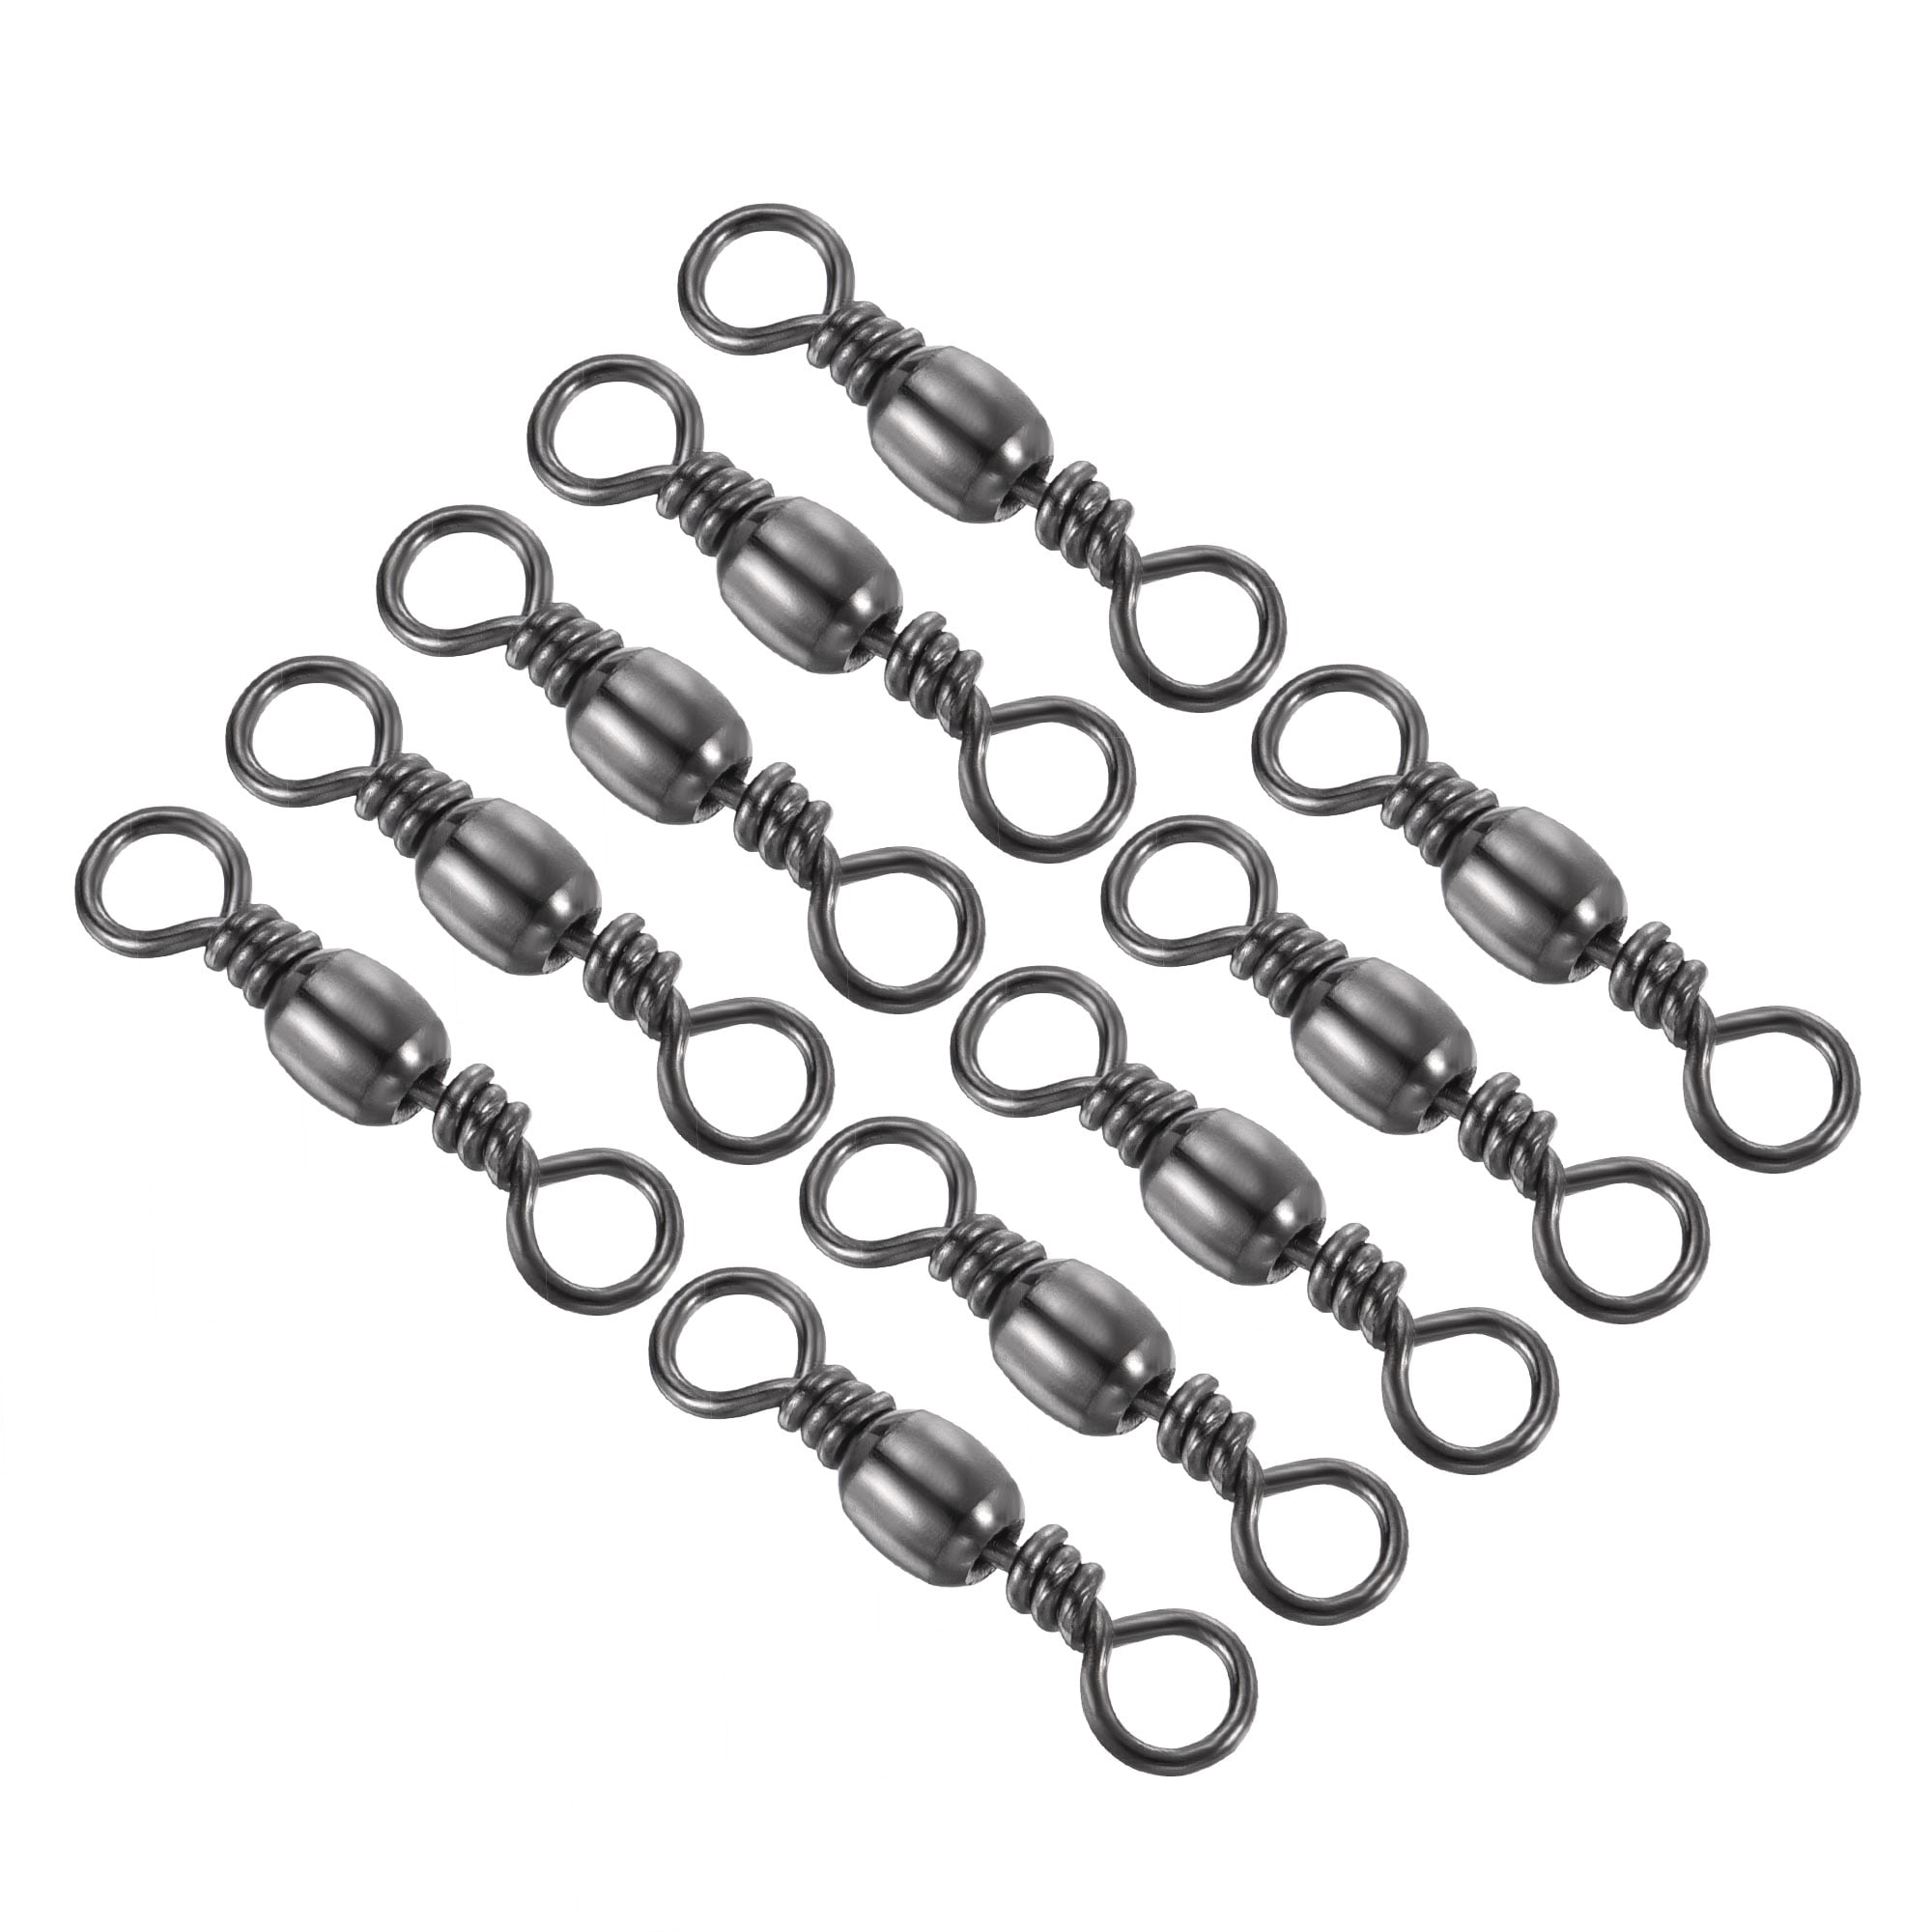 Uxcell 99LBS Stainless Steel Fishing Barrel Swivels, Black 50 Pack 